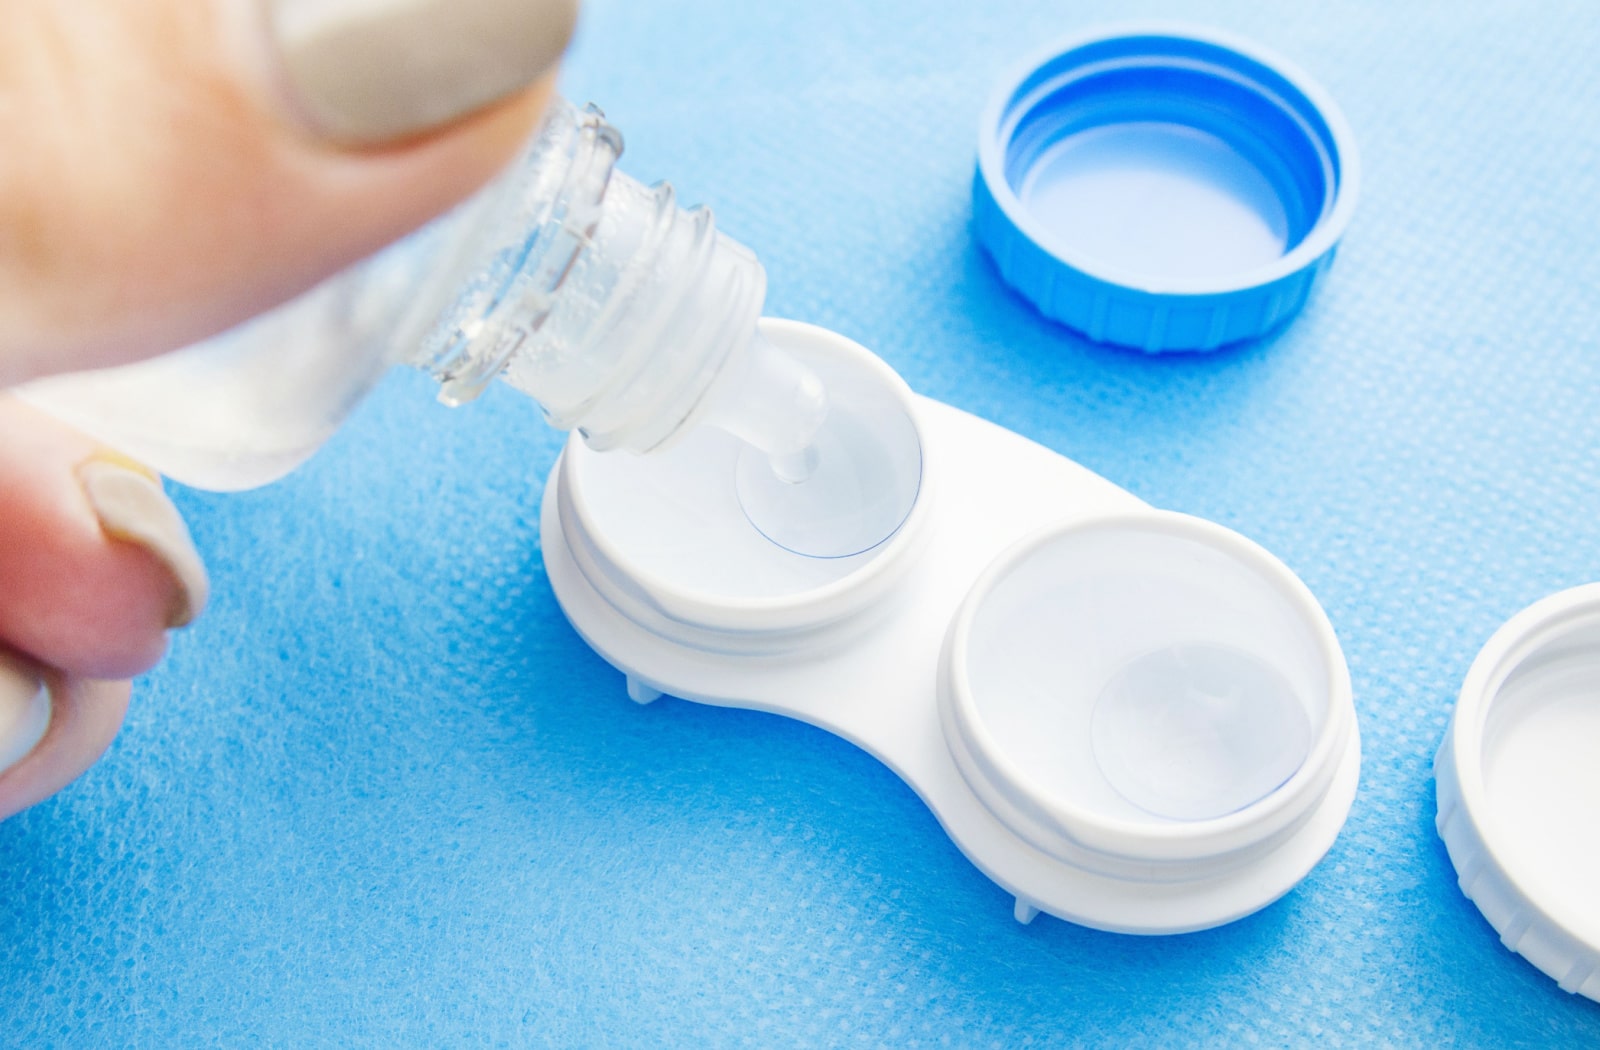 How To Store Contact Lens